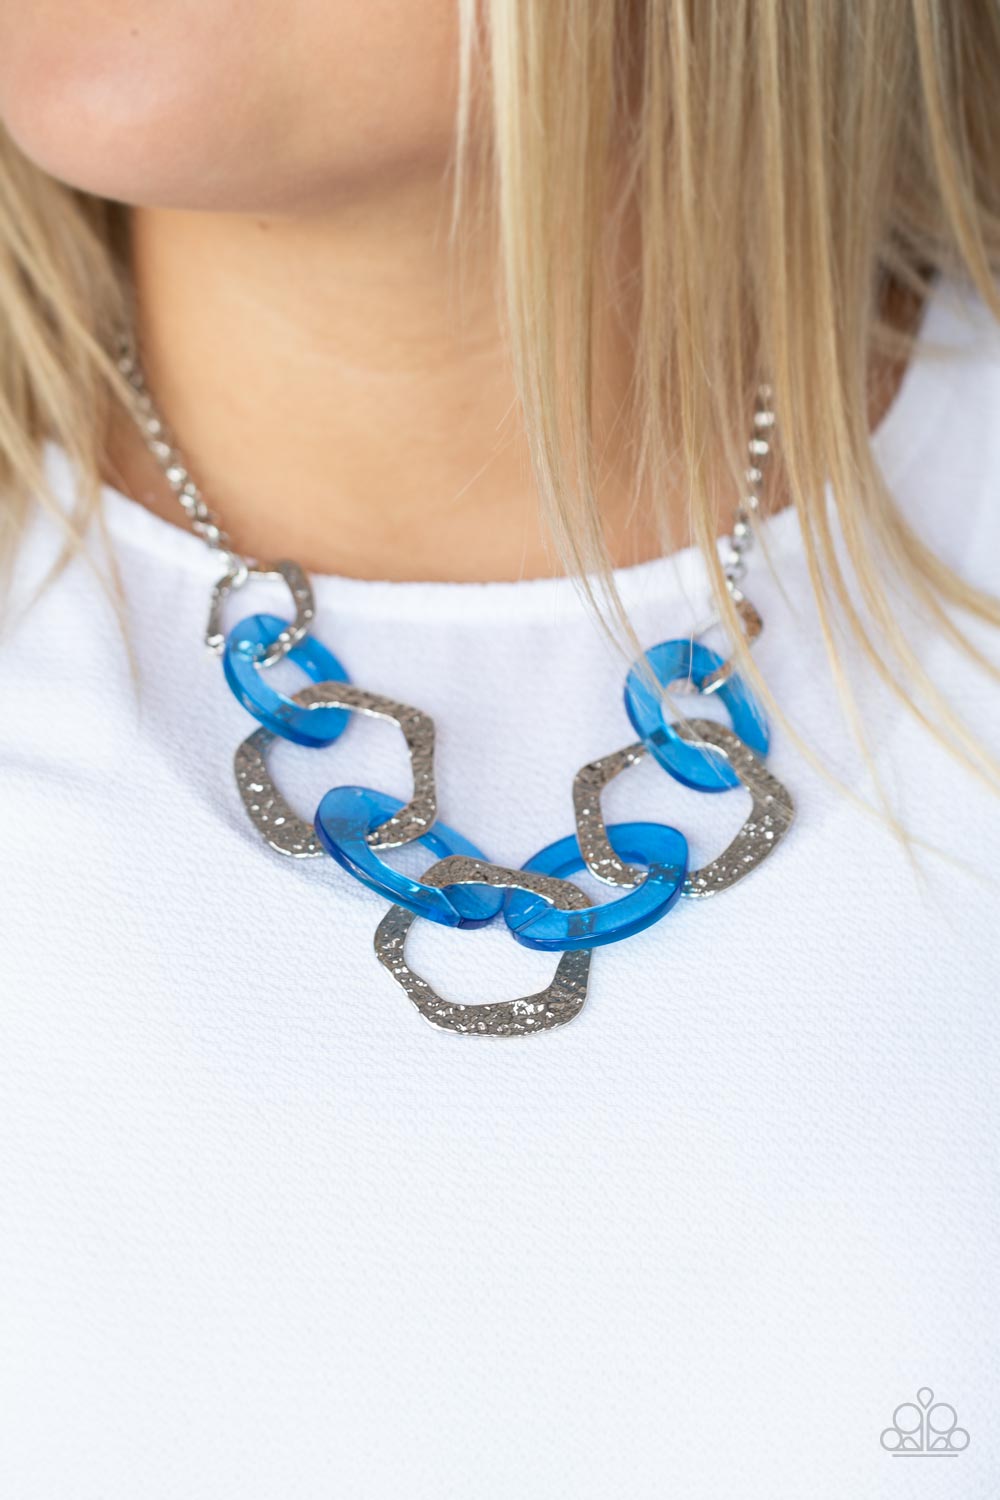 Paparazzi Accessories Urban Circus - Blue Necklace & Earrings